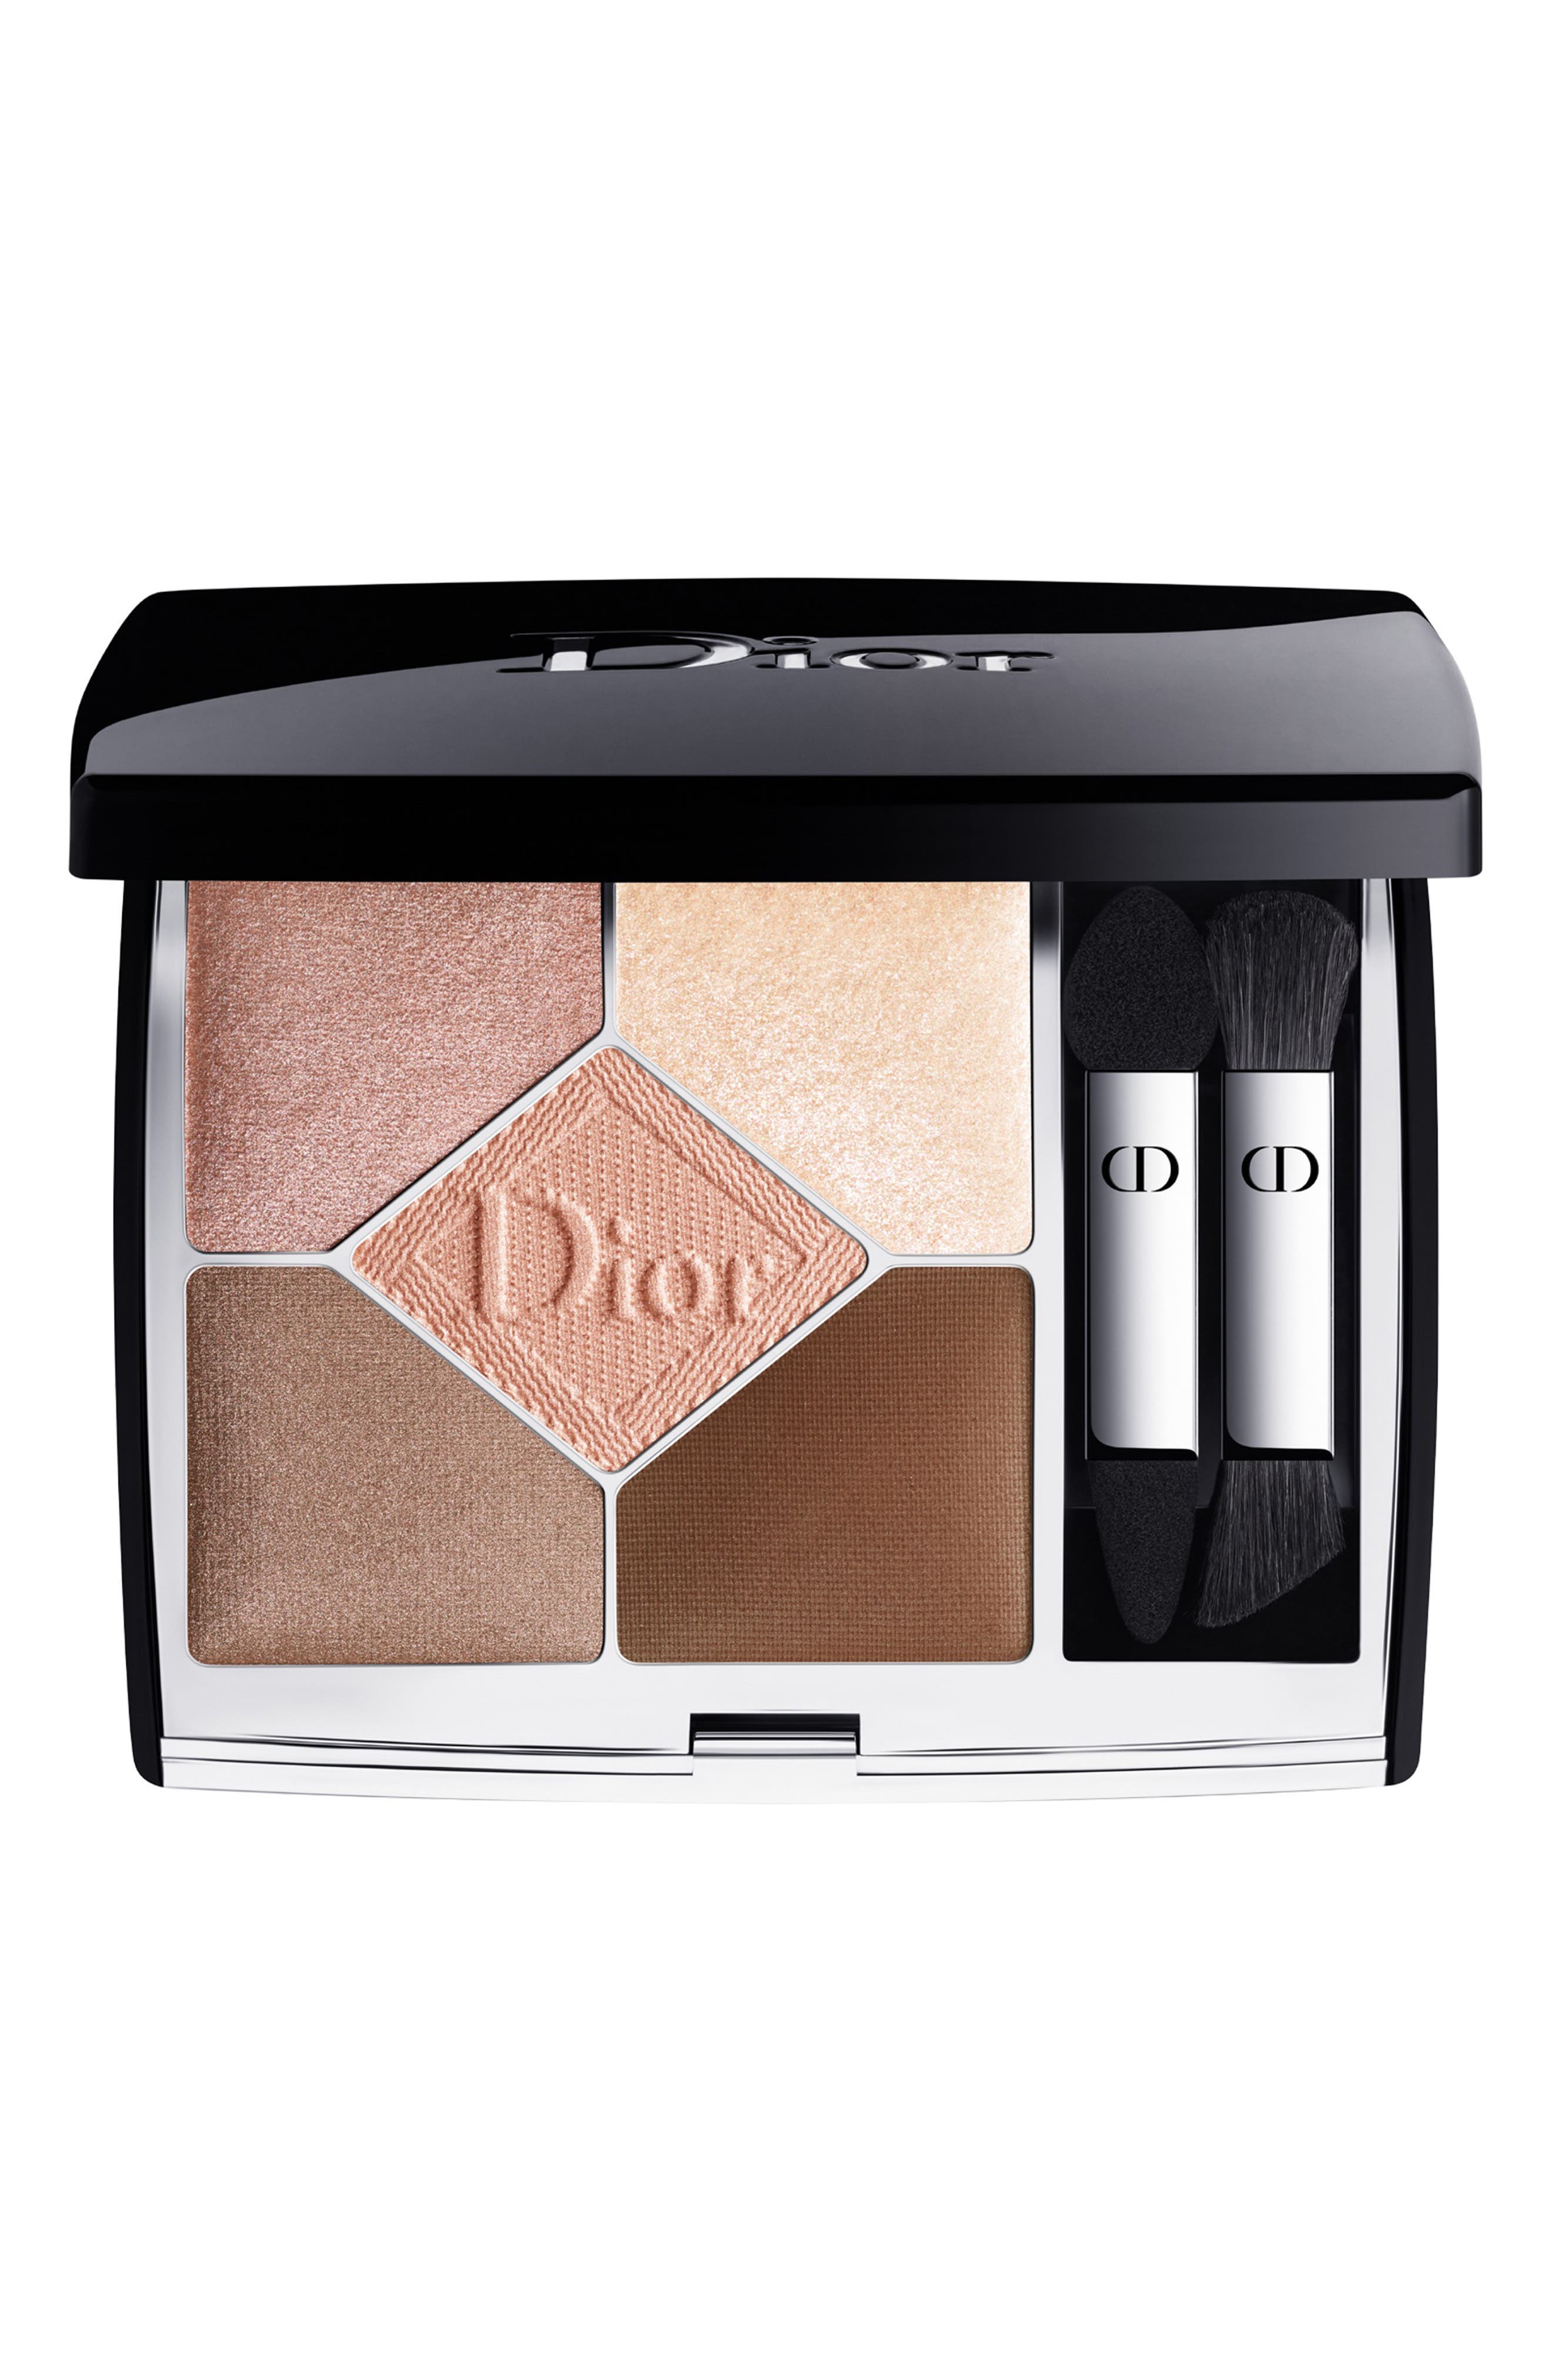 Dior 5 Couleurs Couture Eyeshadow Palette in 649 Nude Dress